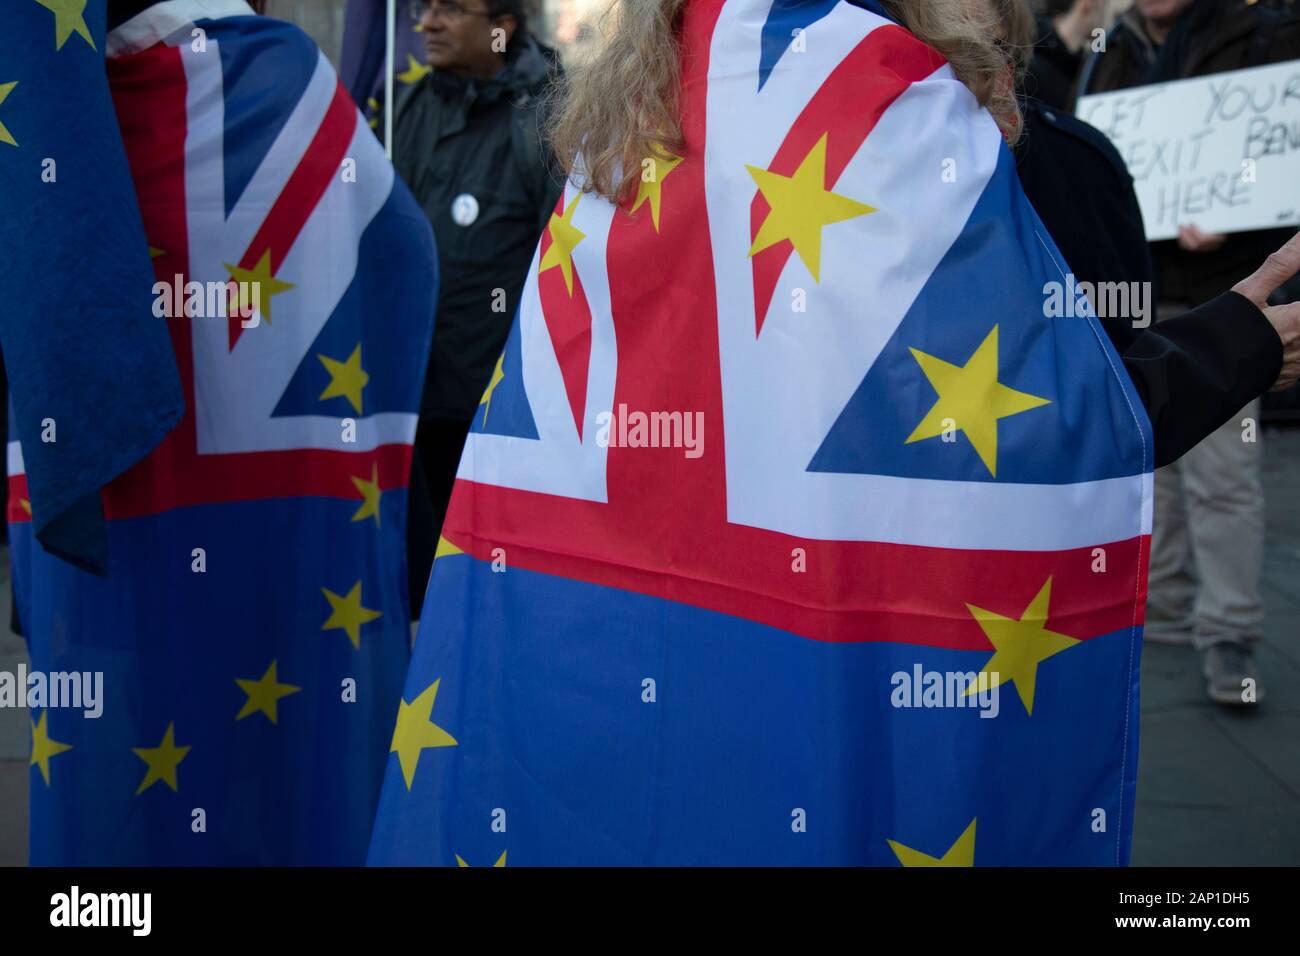 Anti Brexit protesters wearing European Union flags at Westminster outside Parliament on 15th January 2020 in London, England, United Kingdom. With a majority Conservative government in power and Brexit day at the end of January looming, the role of these protesters is now to demonstrate in the hope of the softest Brexit deal possible. Stock Photo